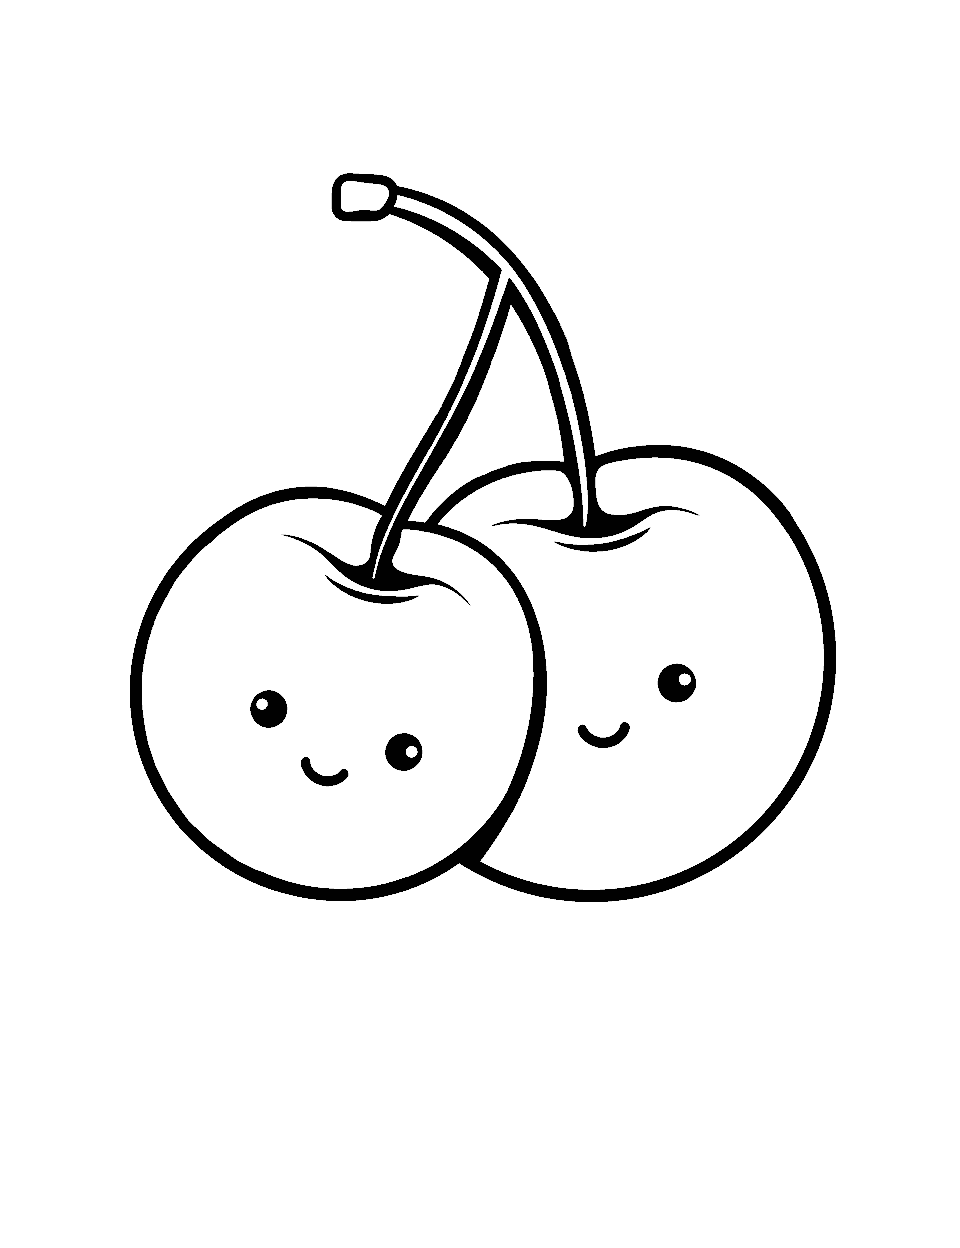 Cherry Twins Fruit Coloring Page - Two cherries attached to a stem, smiling together.